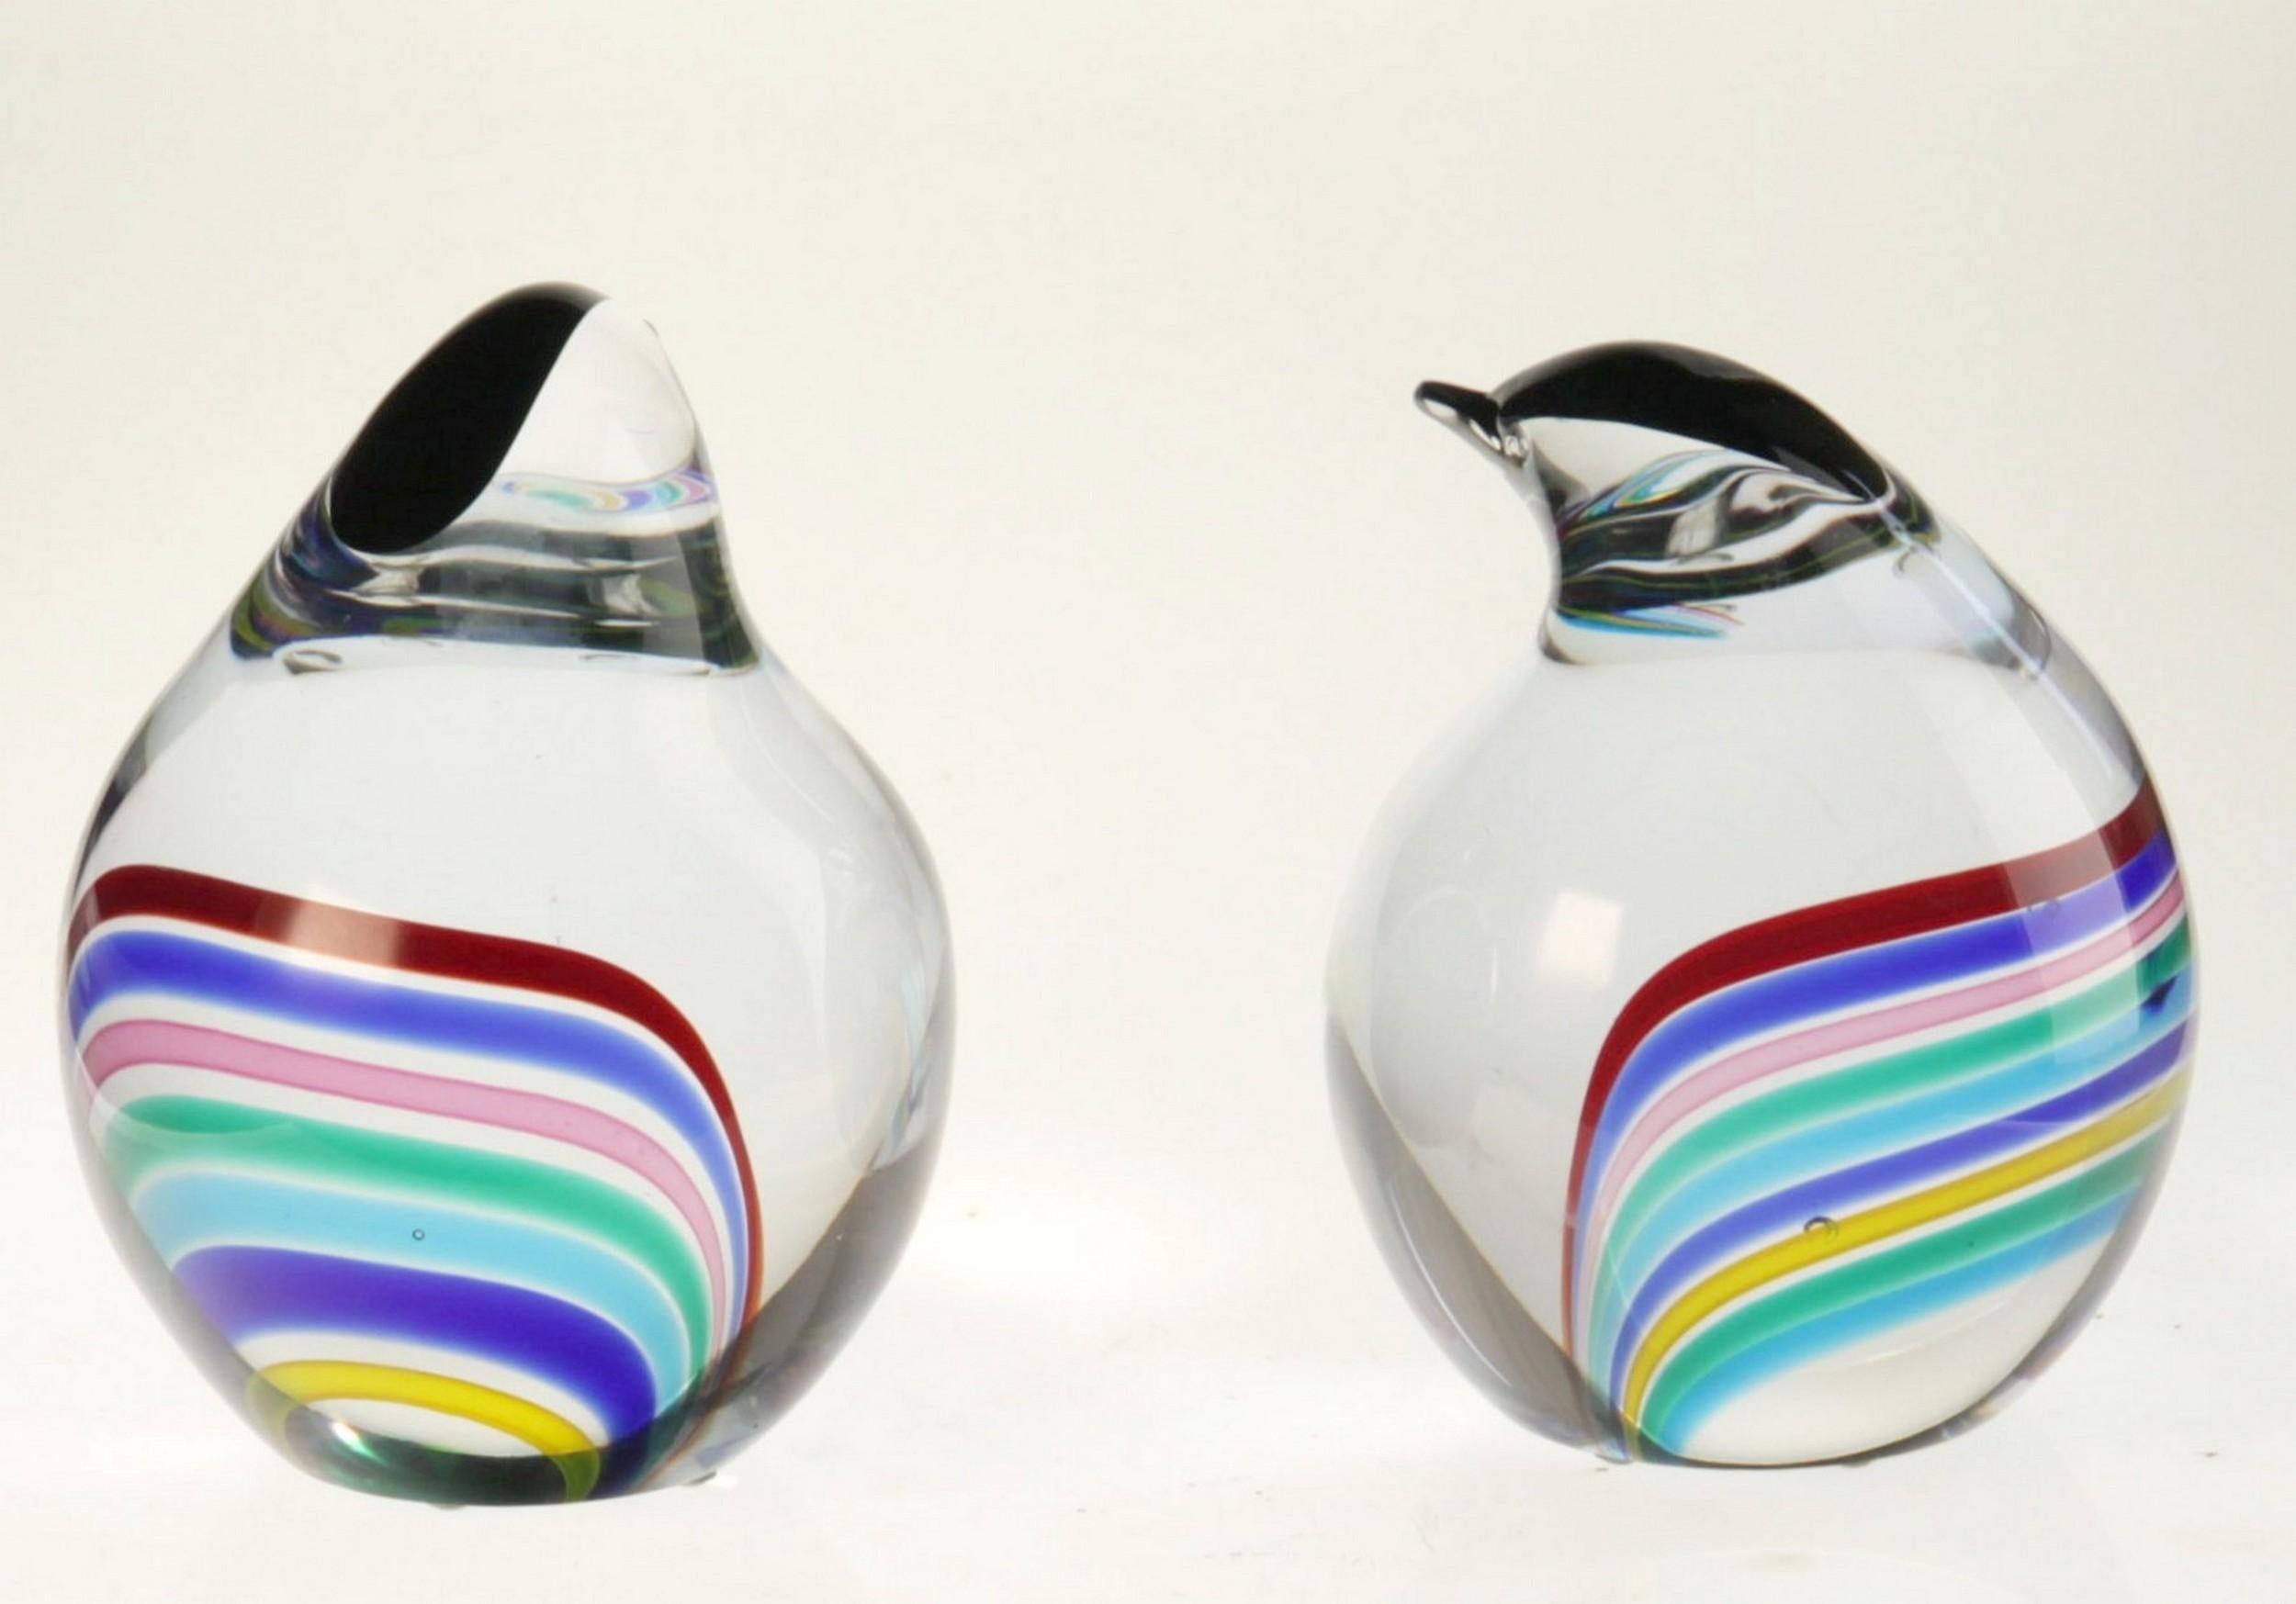 Art Glass Seguso for Bisazza, Pair of Penguin Chicks with Rainbow Canes 1993 Signed